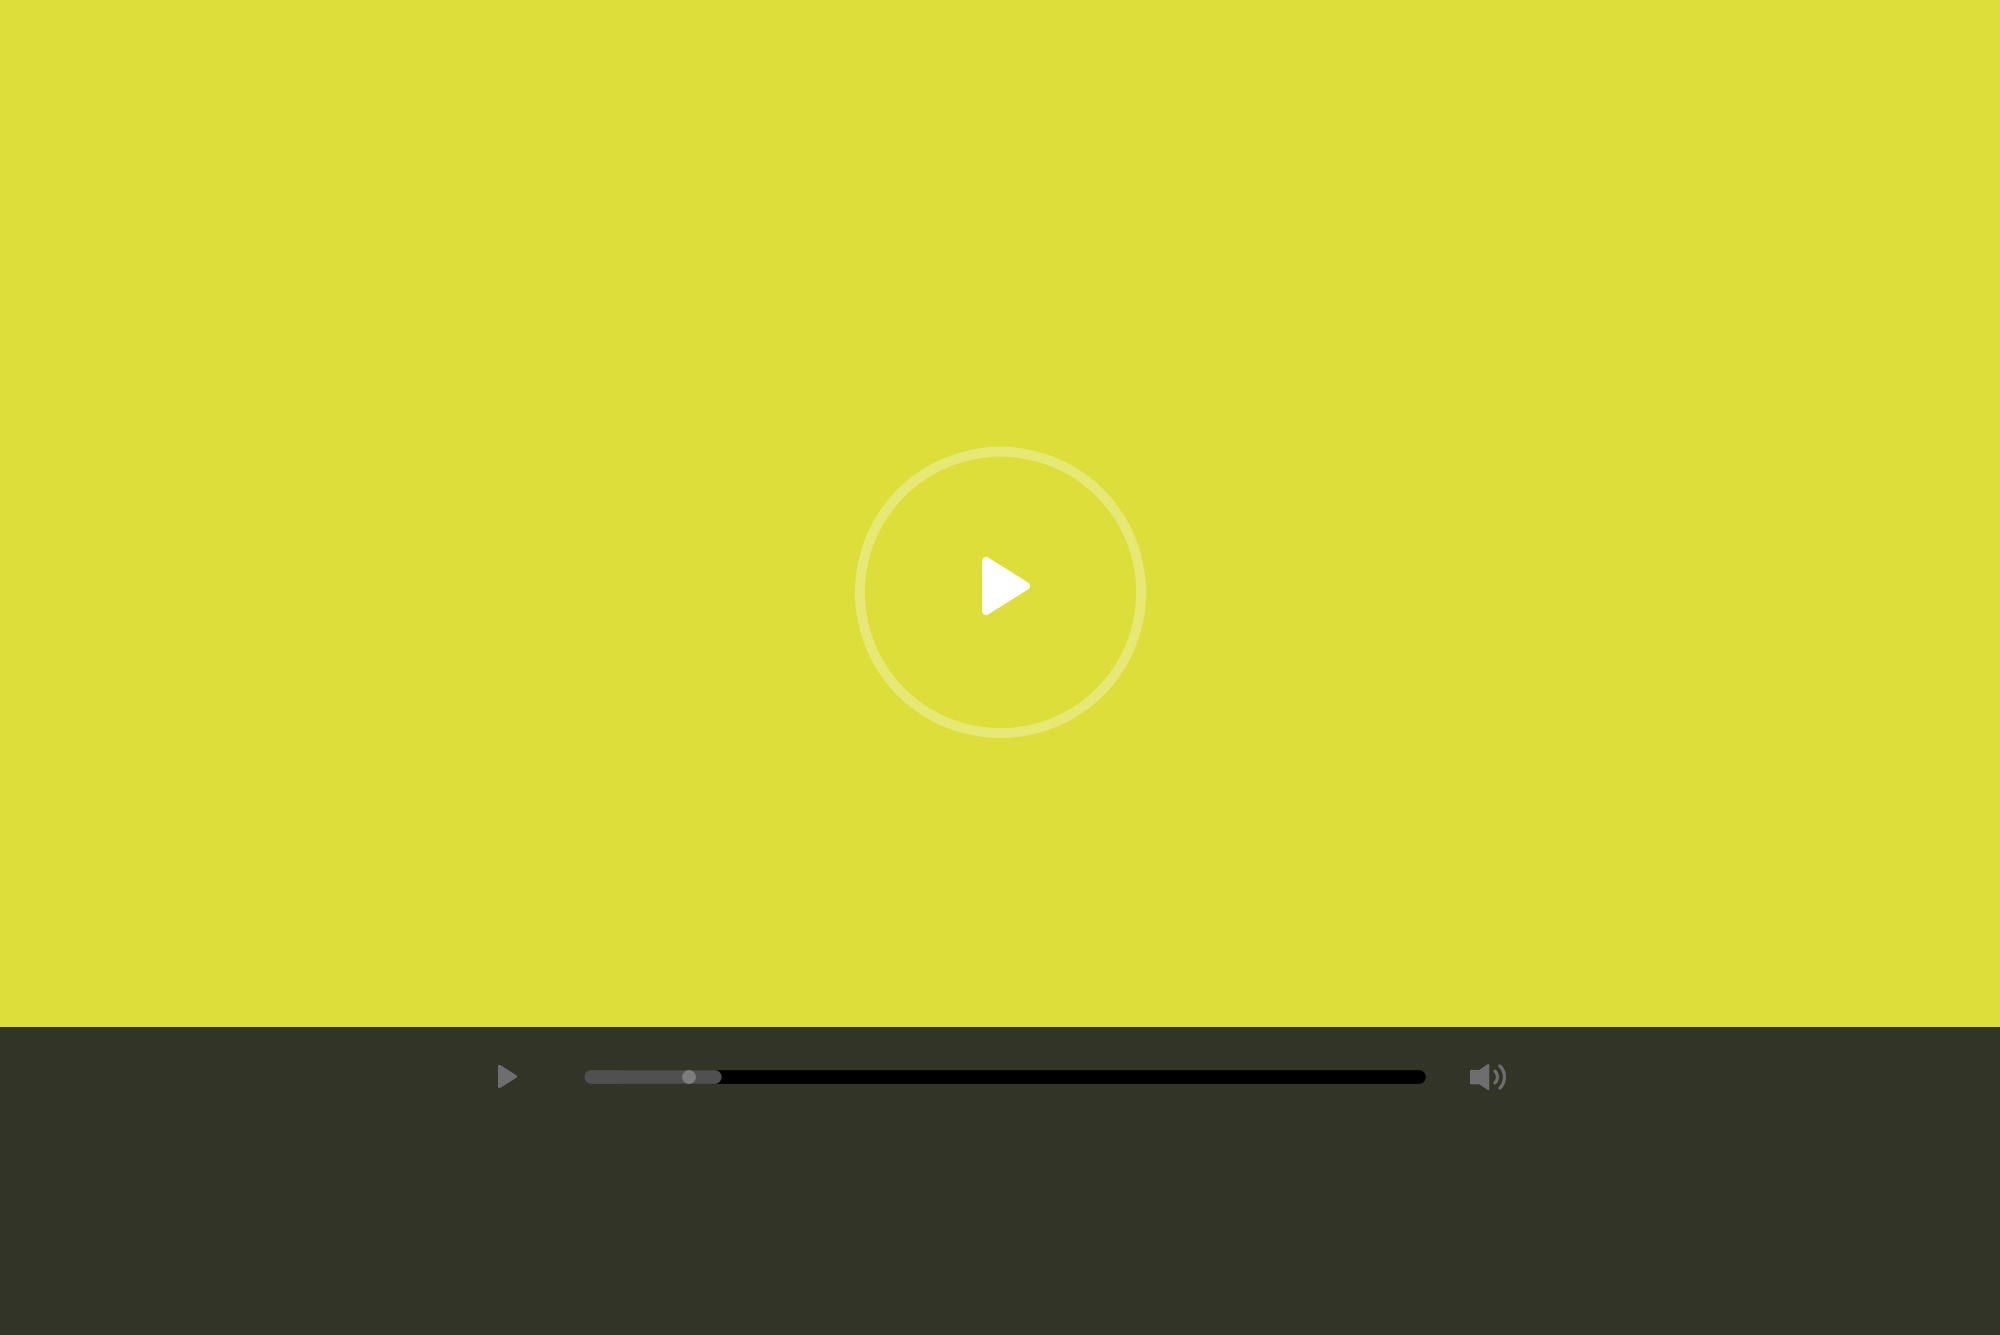 Video play button on yellow background - Video matters